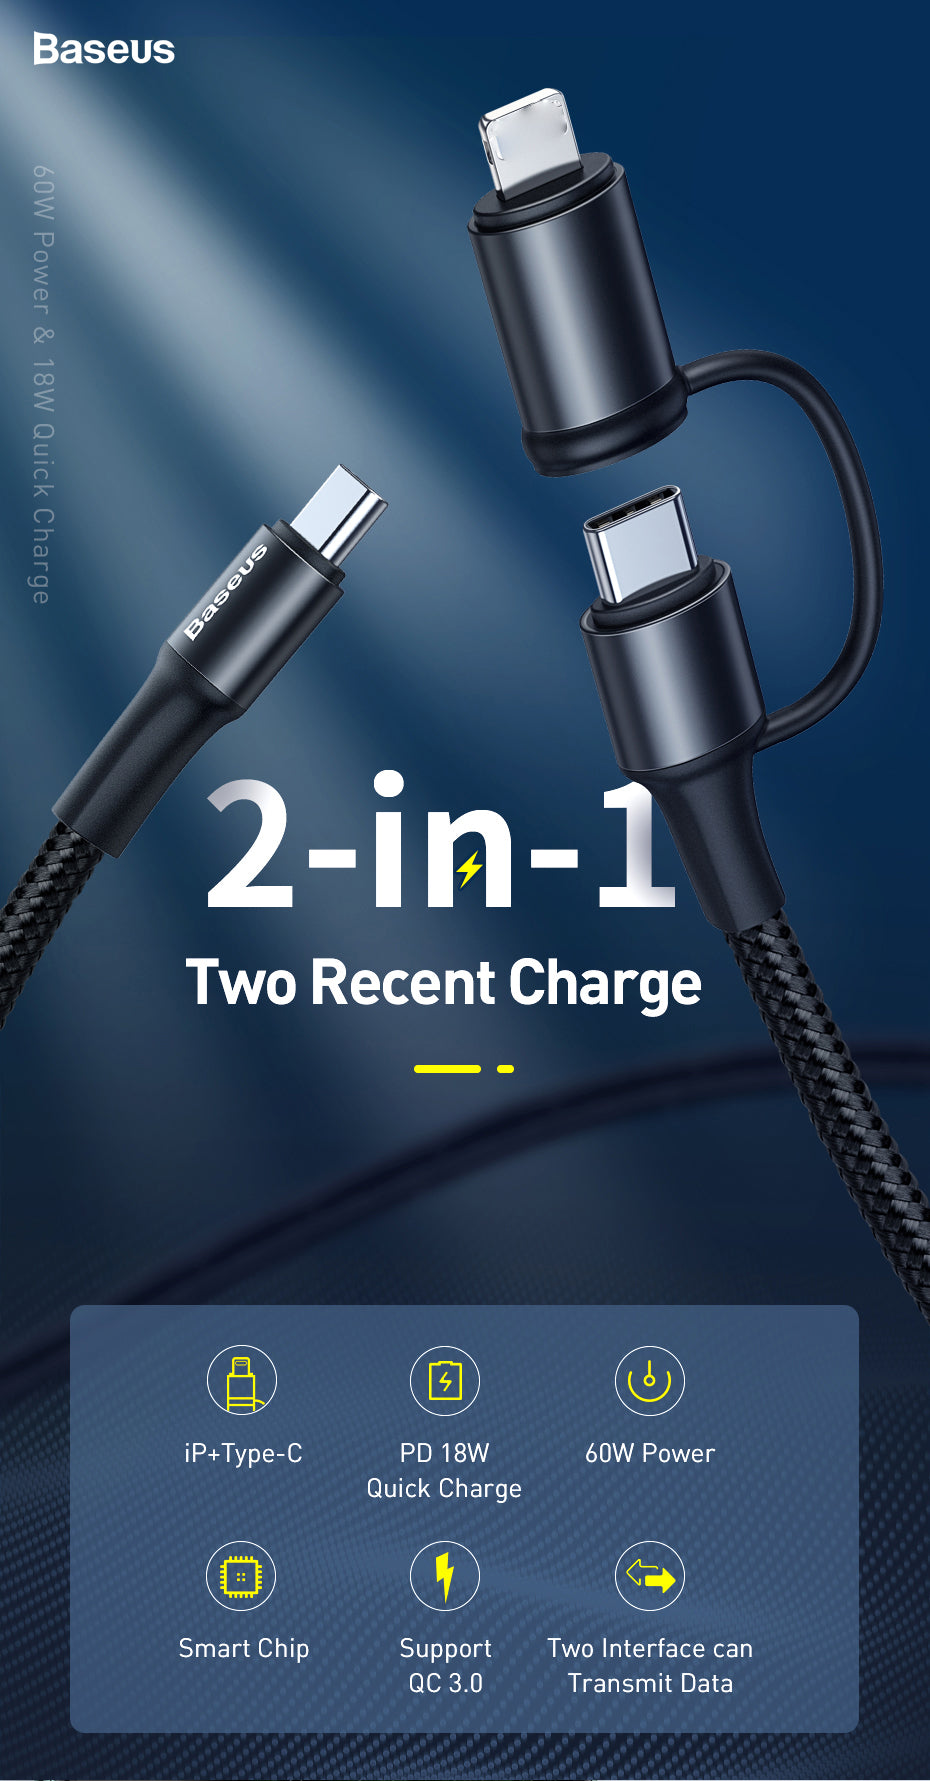 Baseus 2in1 60W Type C USB Cable Quick Charge Support Notebook Charger USB  Cable Data Wire Transmission Fast Charging USB Cable|Mobile Phone Cables| -  AliExpress